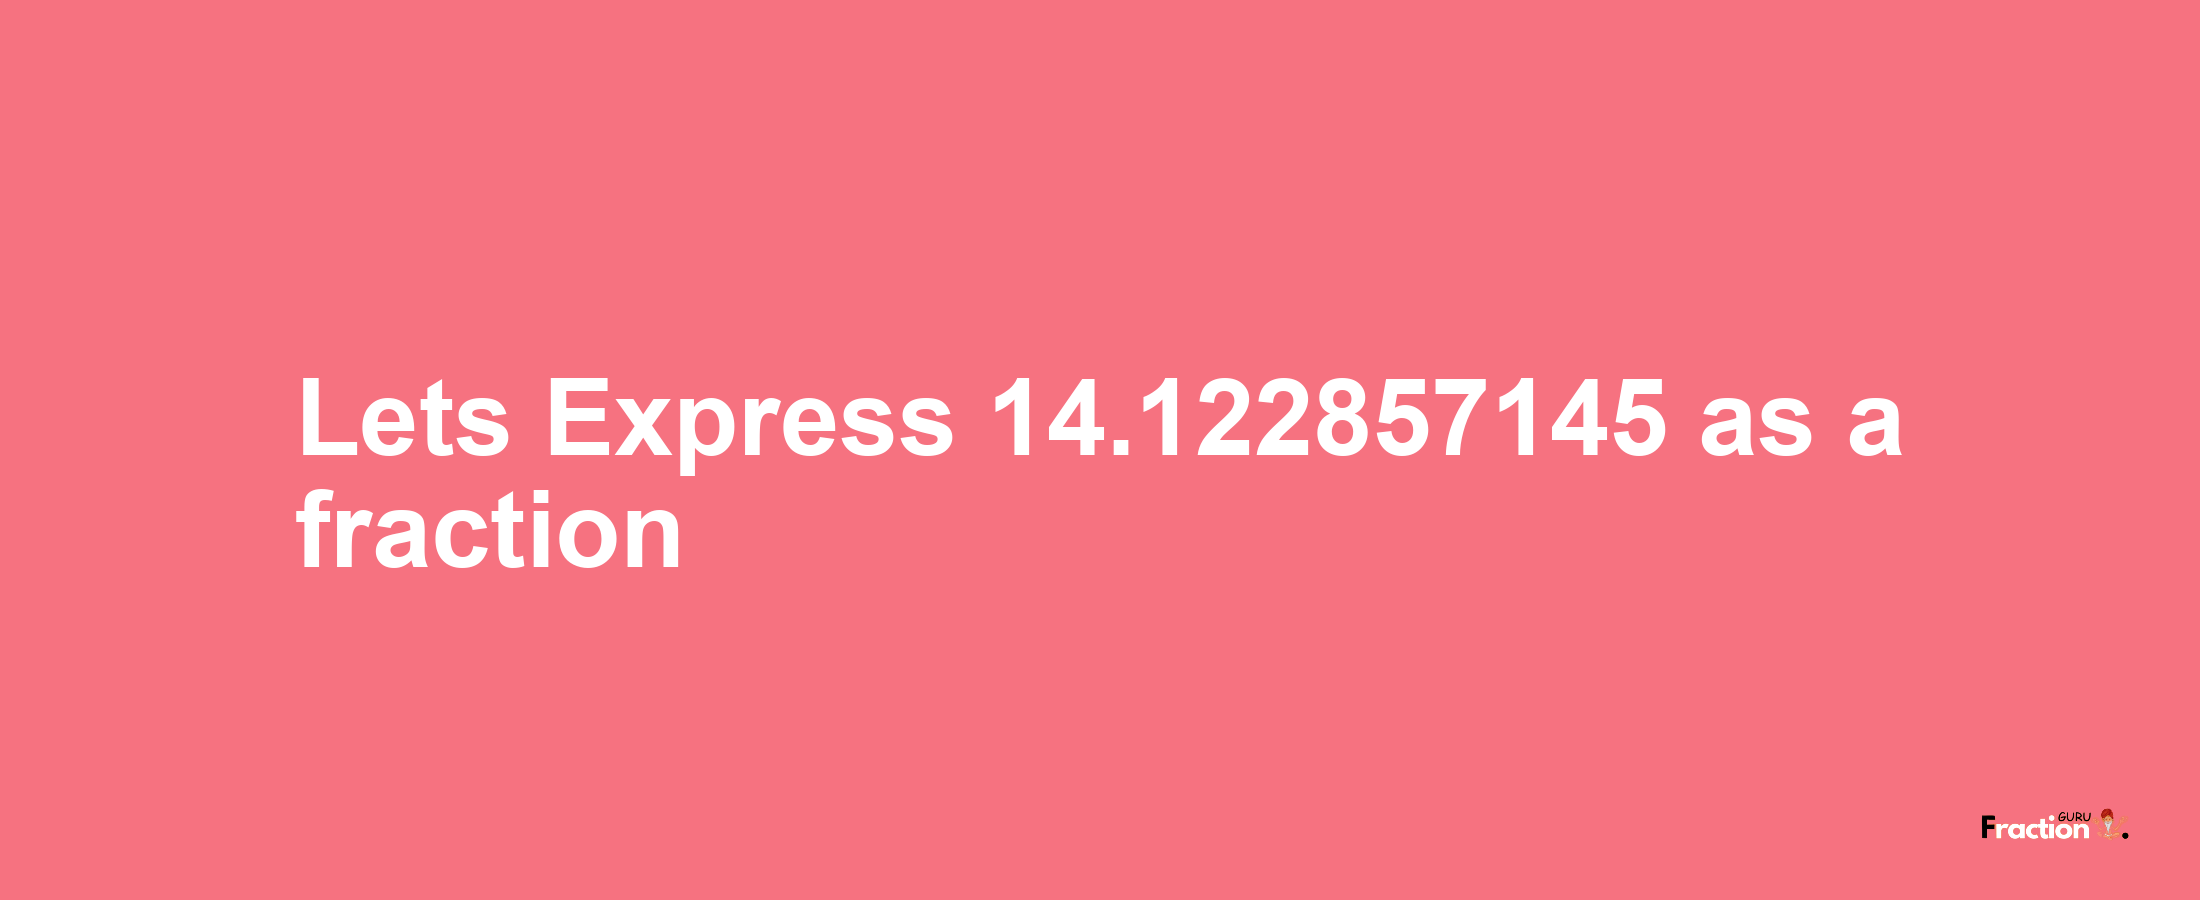 Lets Express 14.122857145 as afraction